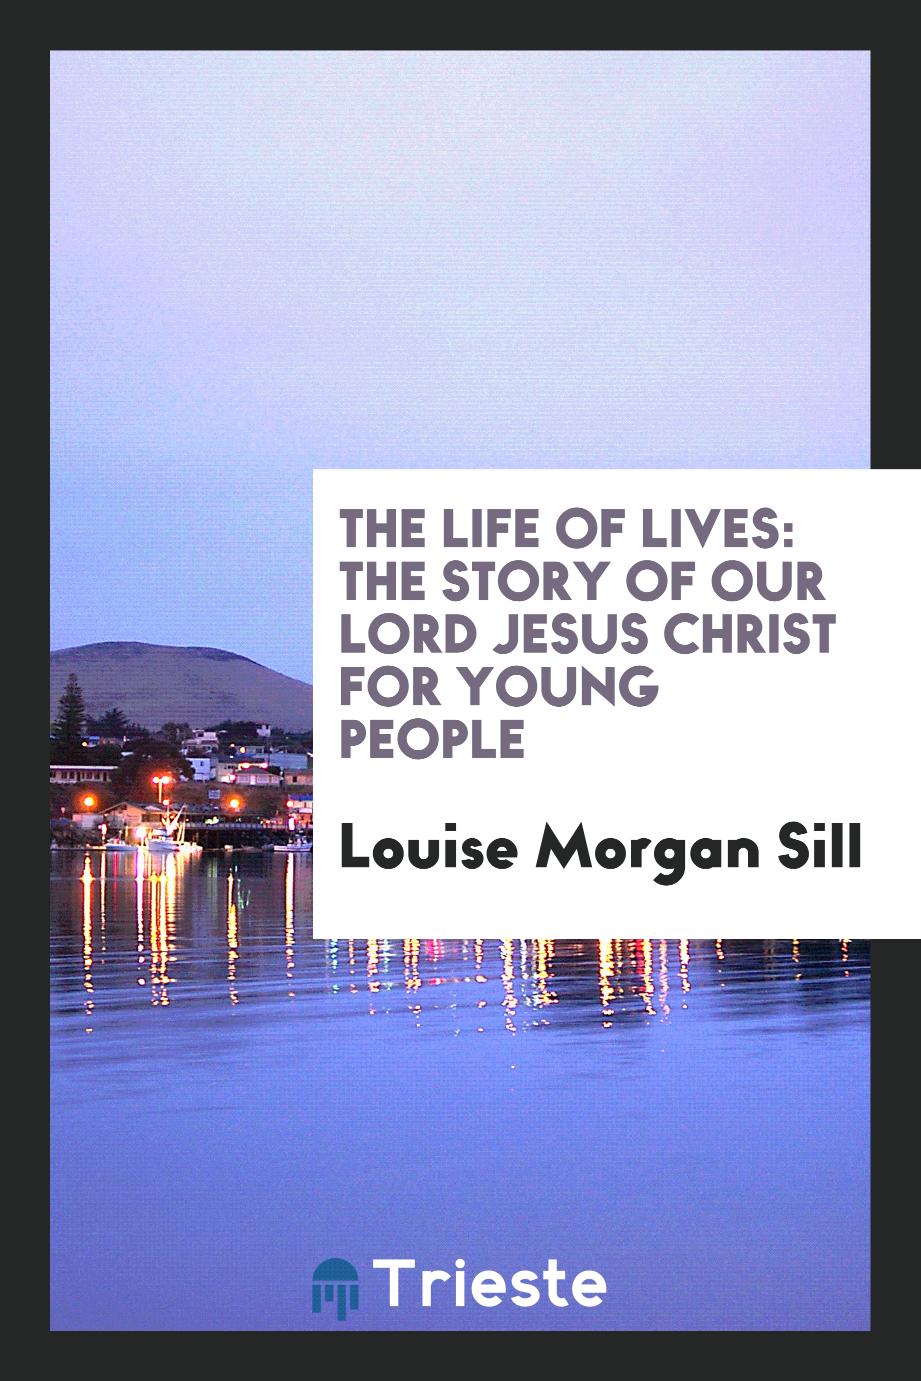 The life of lives: the story of Our Lord Jesus Christ for young people